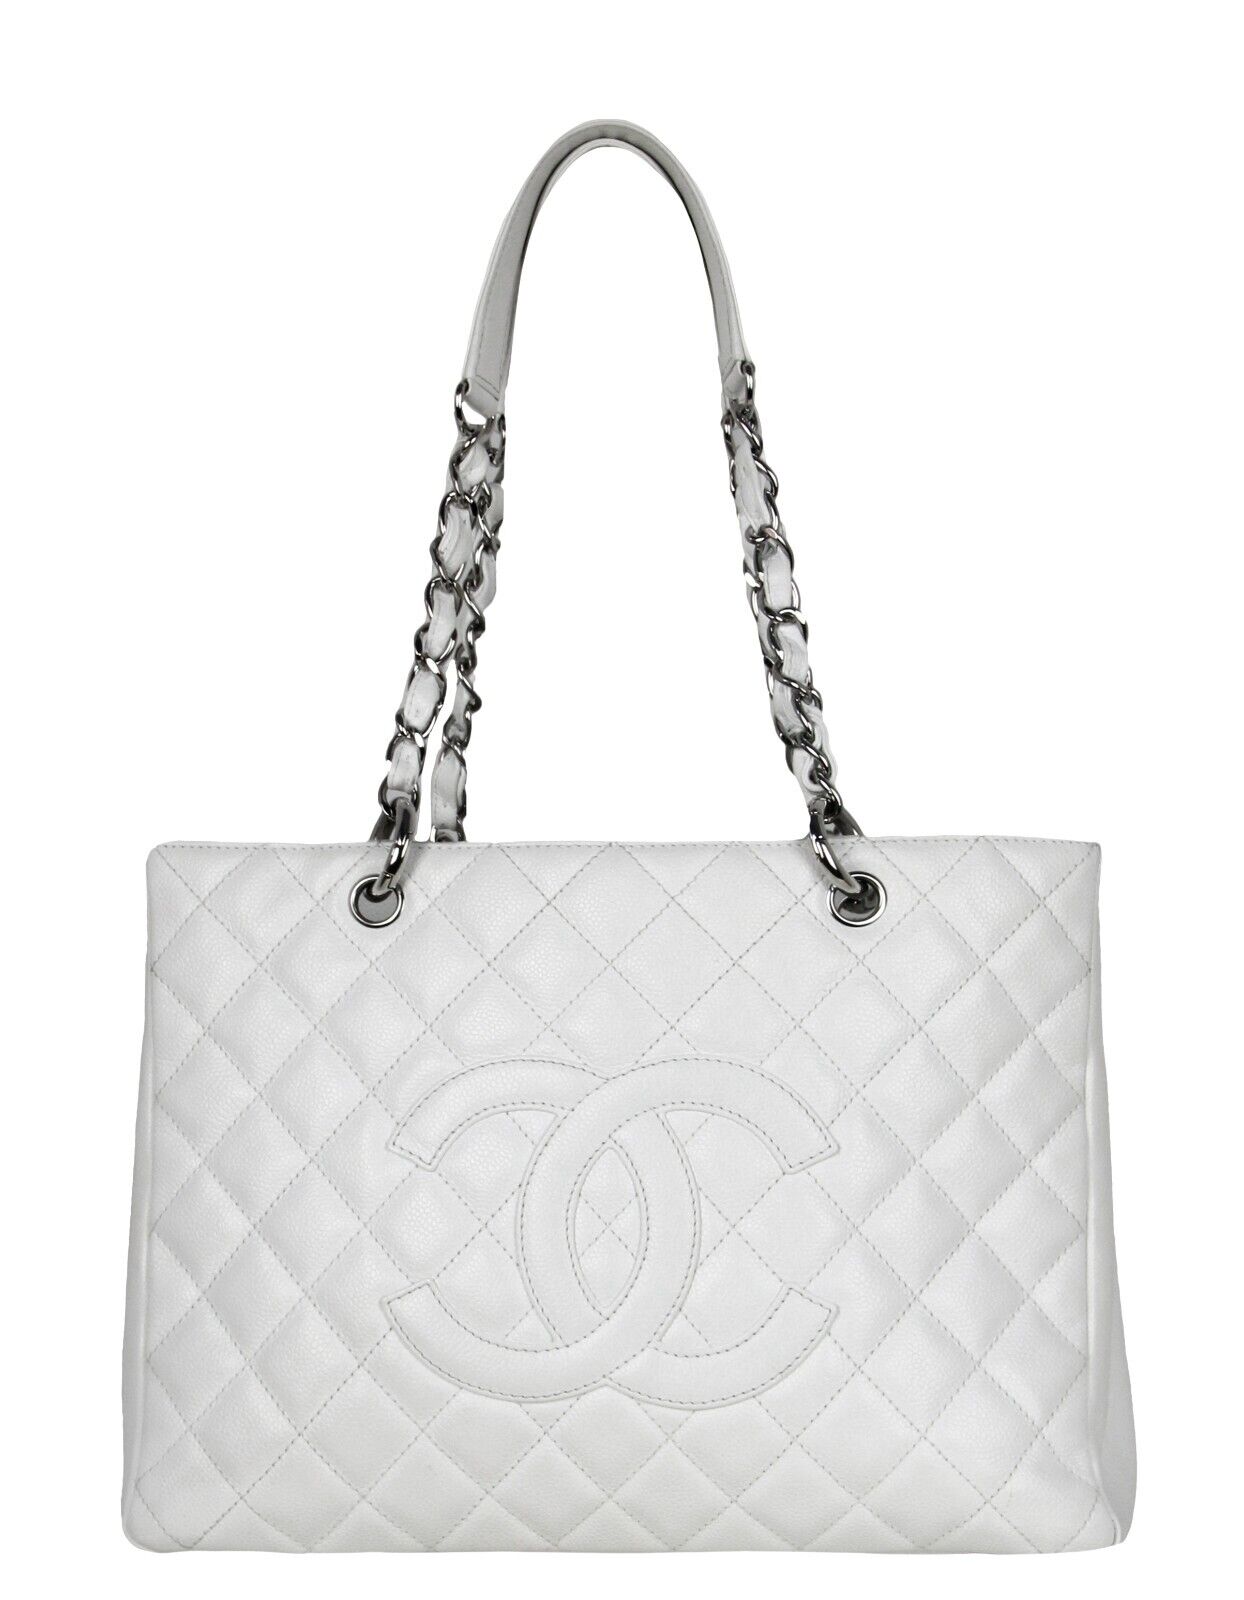 Authentic Chanel White Caviar Leather Quilted Grand Shopper Tote GST Bag